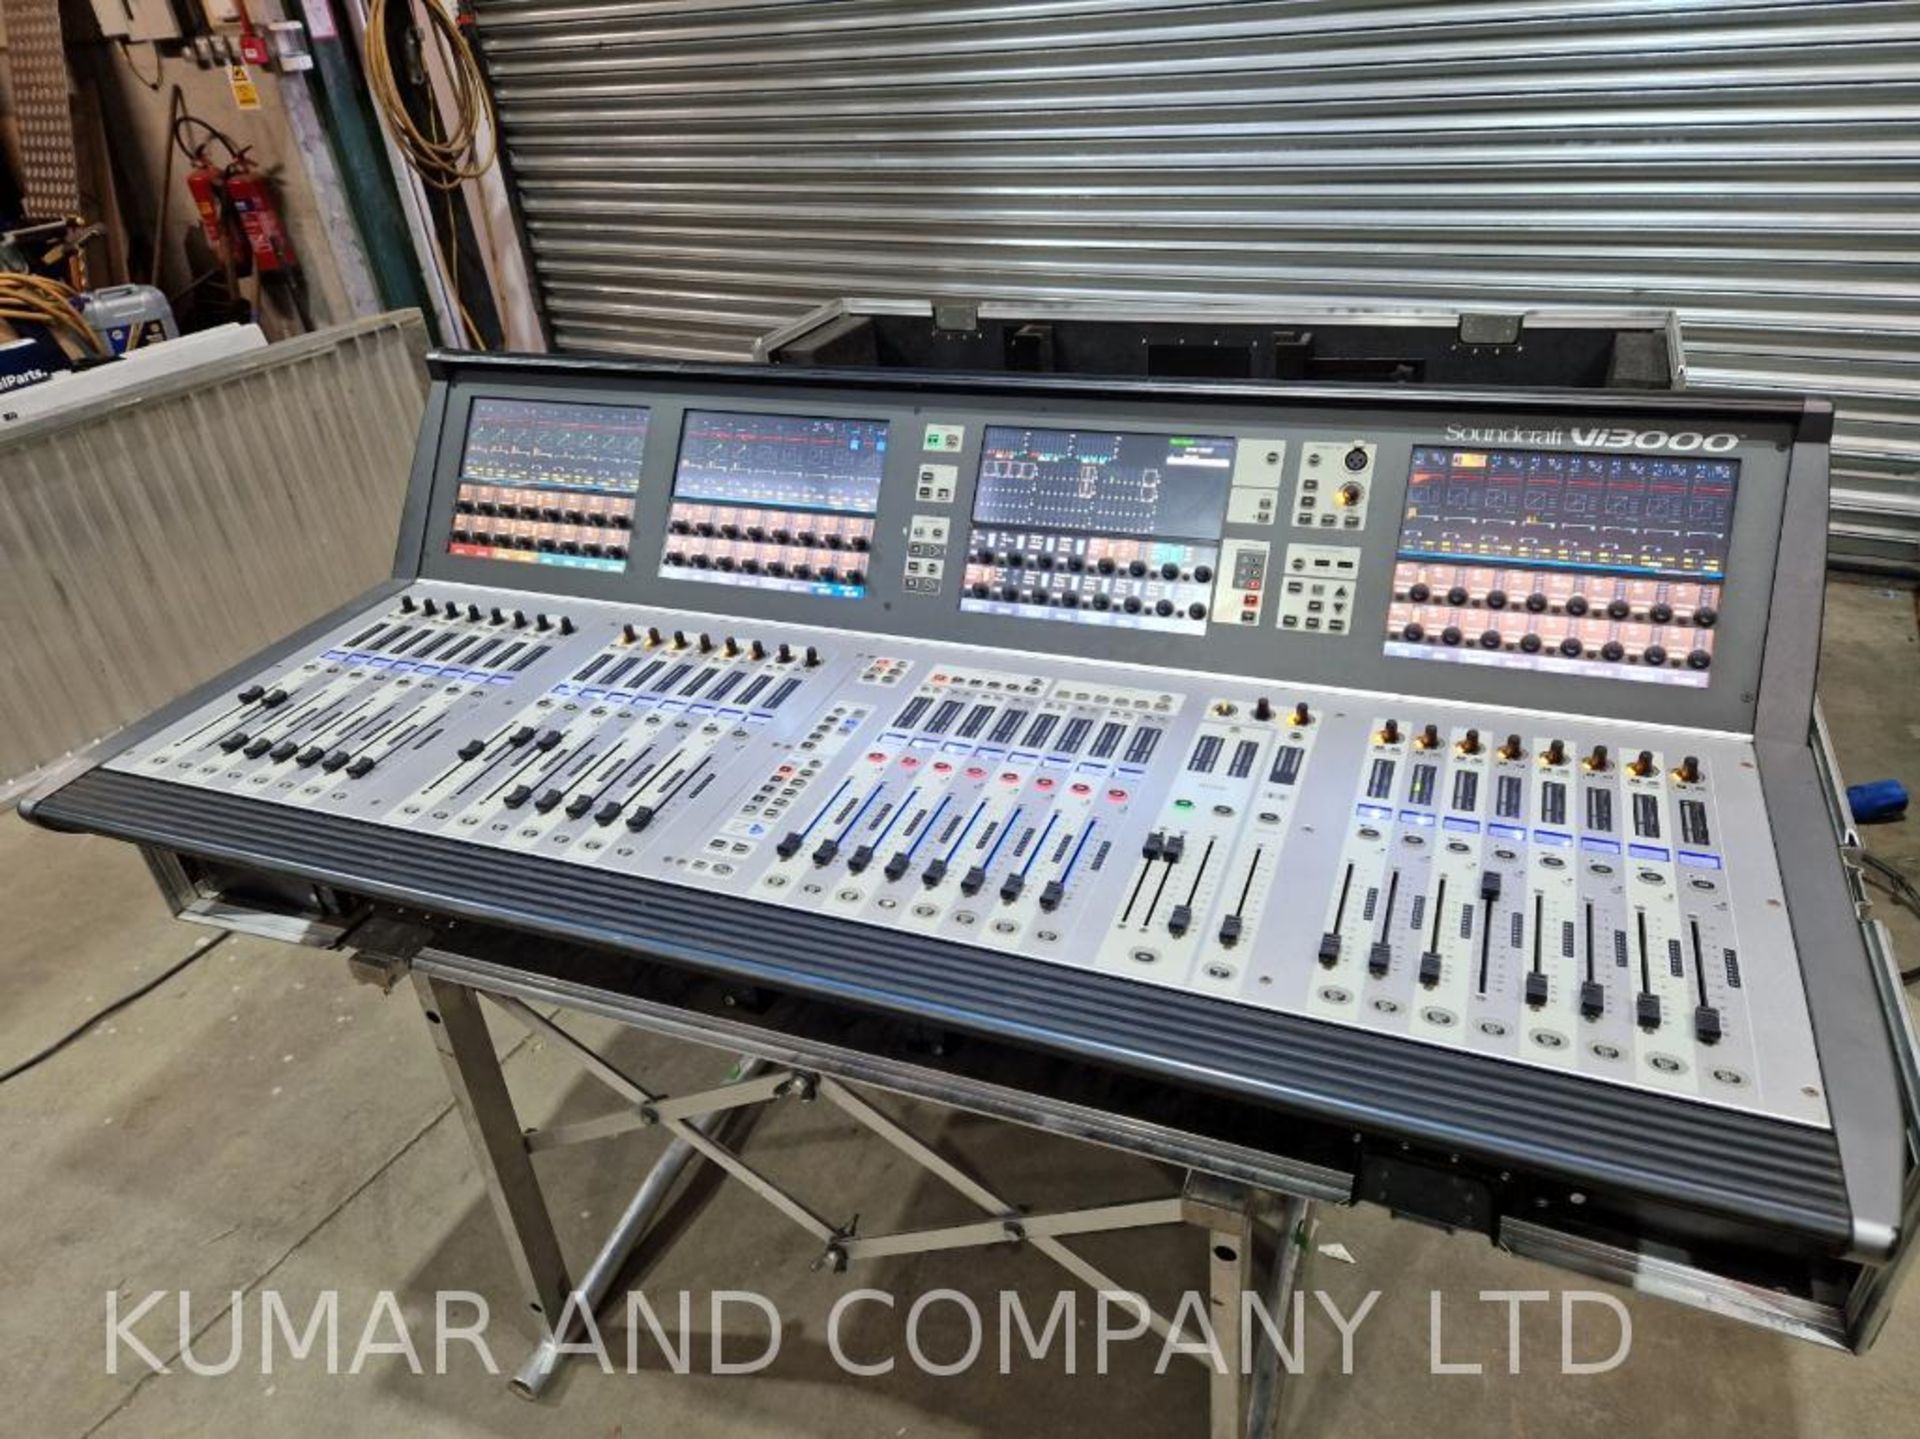 Soundcraft VI3000 Good Working Condition - Missing Desk Cover